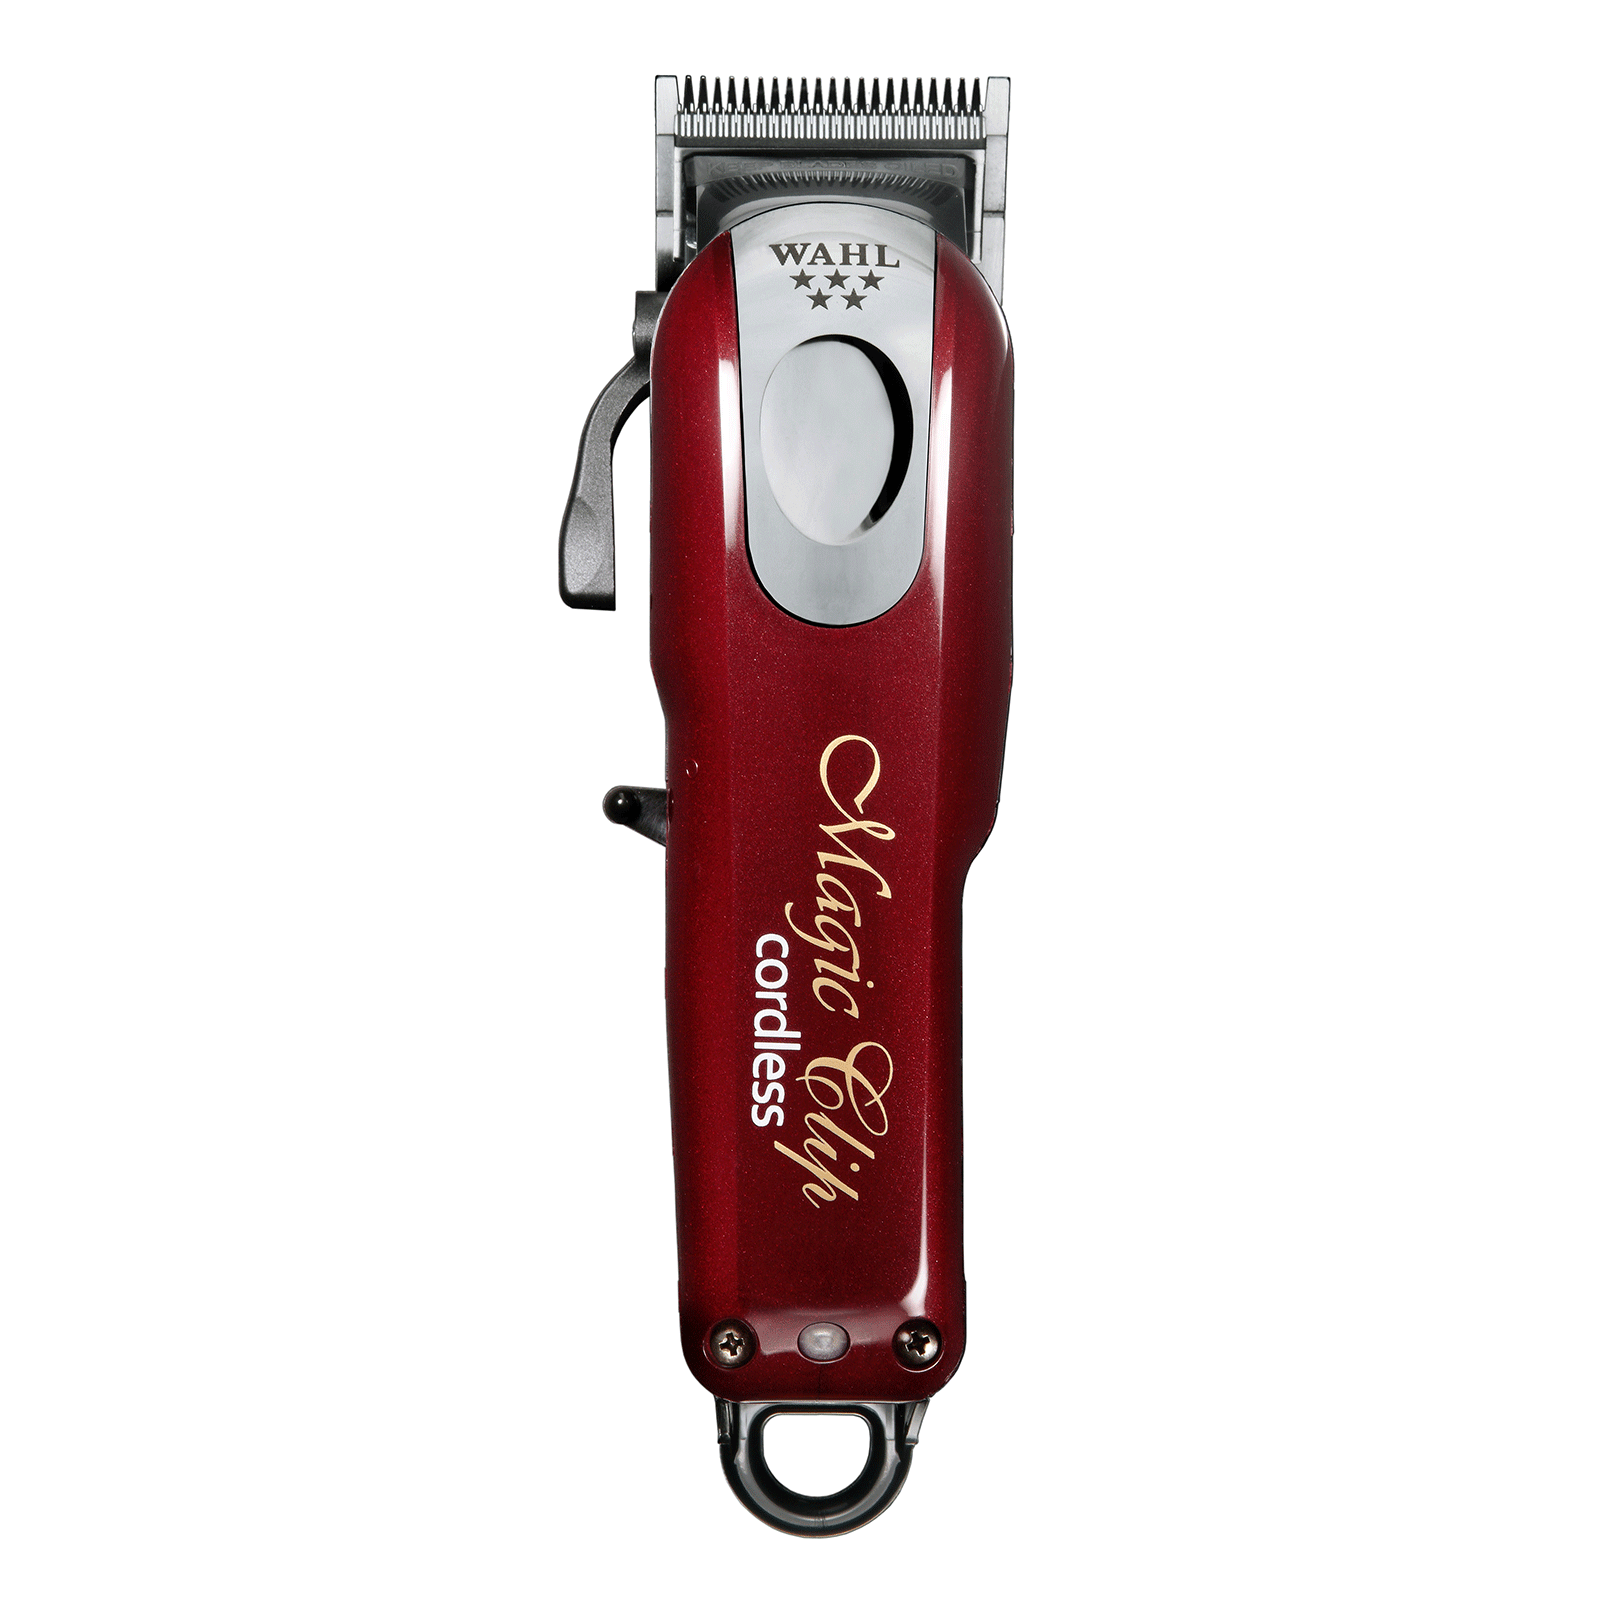 can you sharpen hair clippers